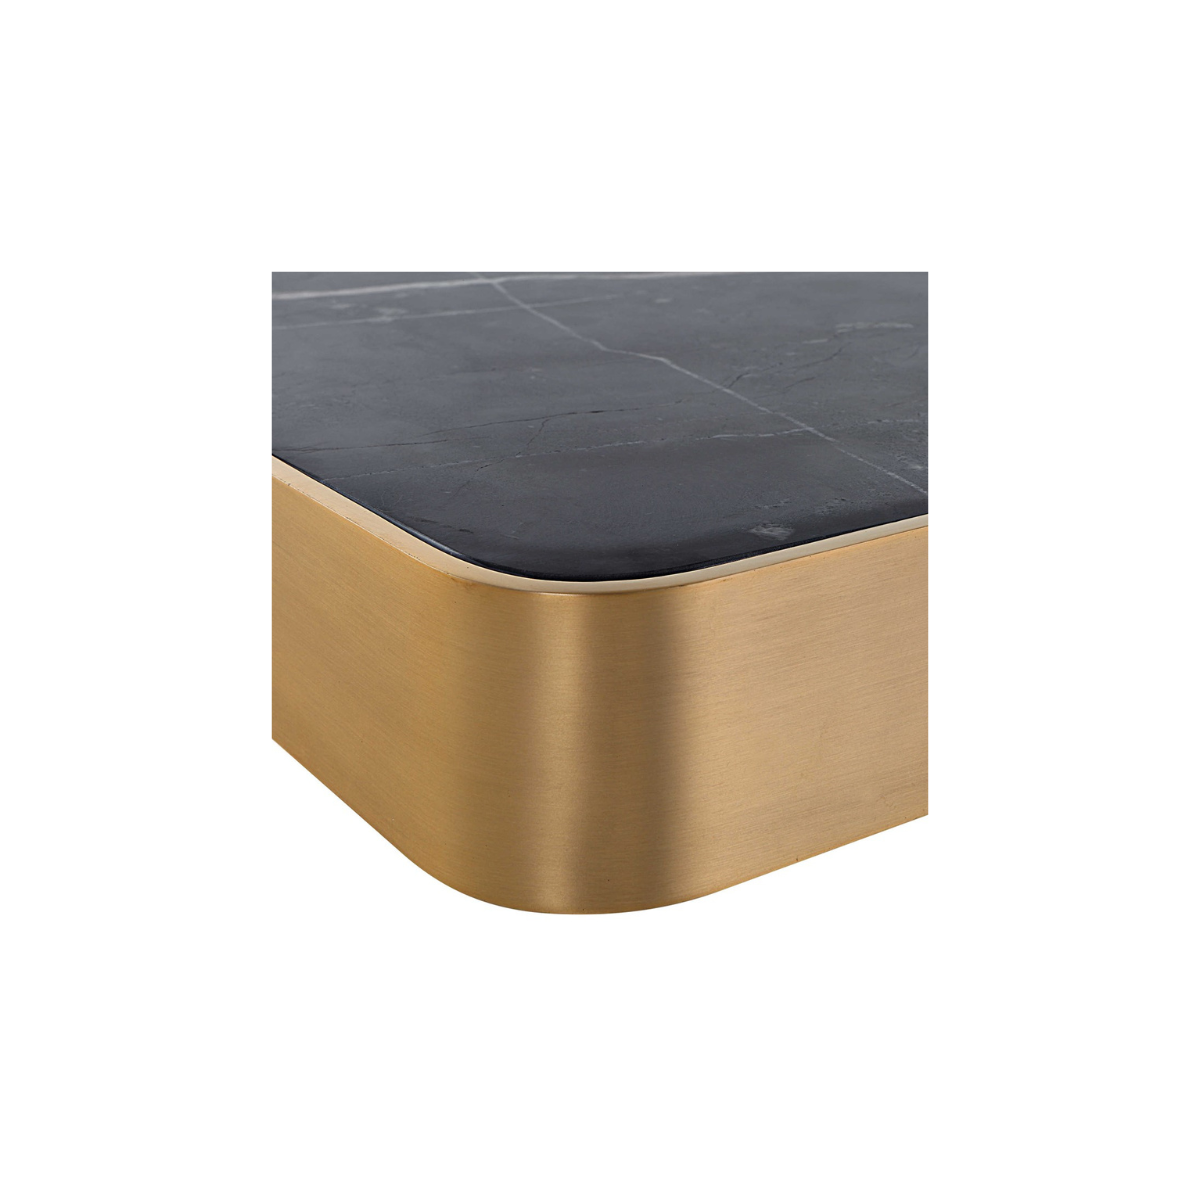 ELEVATED TRAY BLACK MARBLE